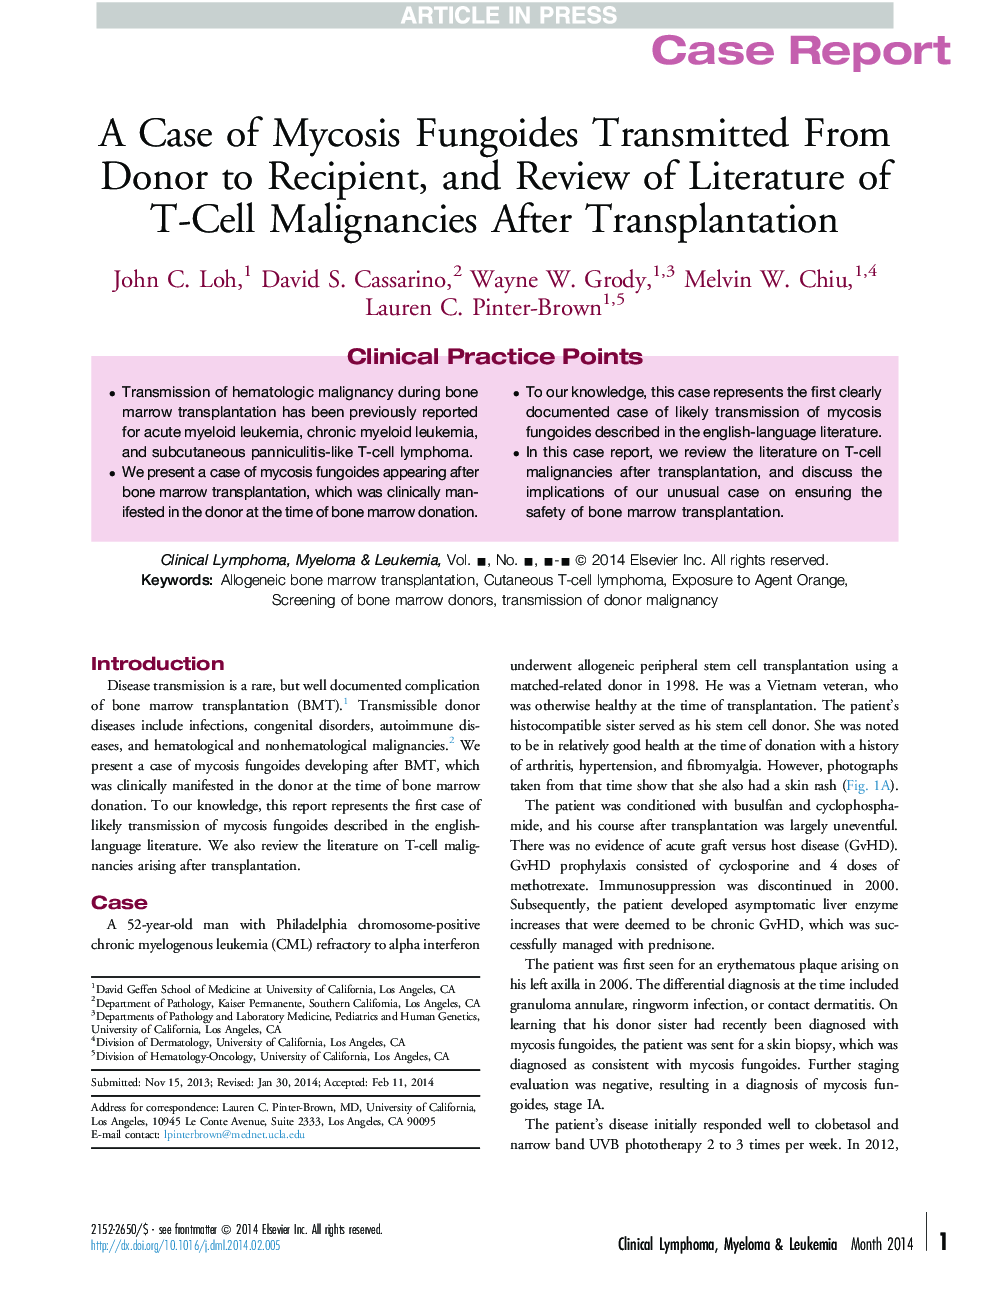 A Case of Mycosis Fungoides Transmitted From Donor to Recipient, and Review of Literature of T-Cell Malignancies After Transplantation